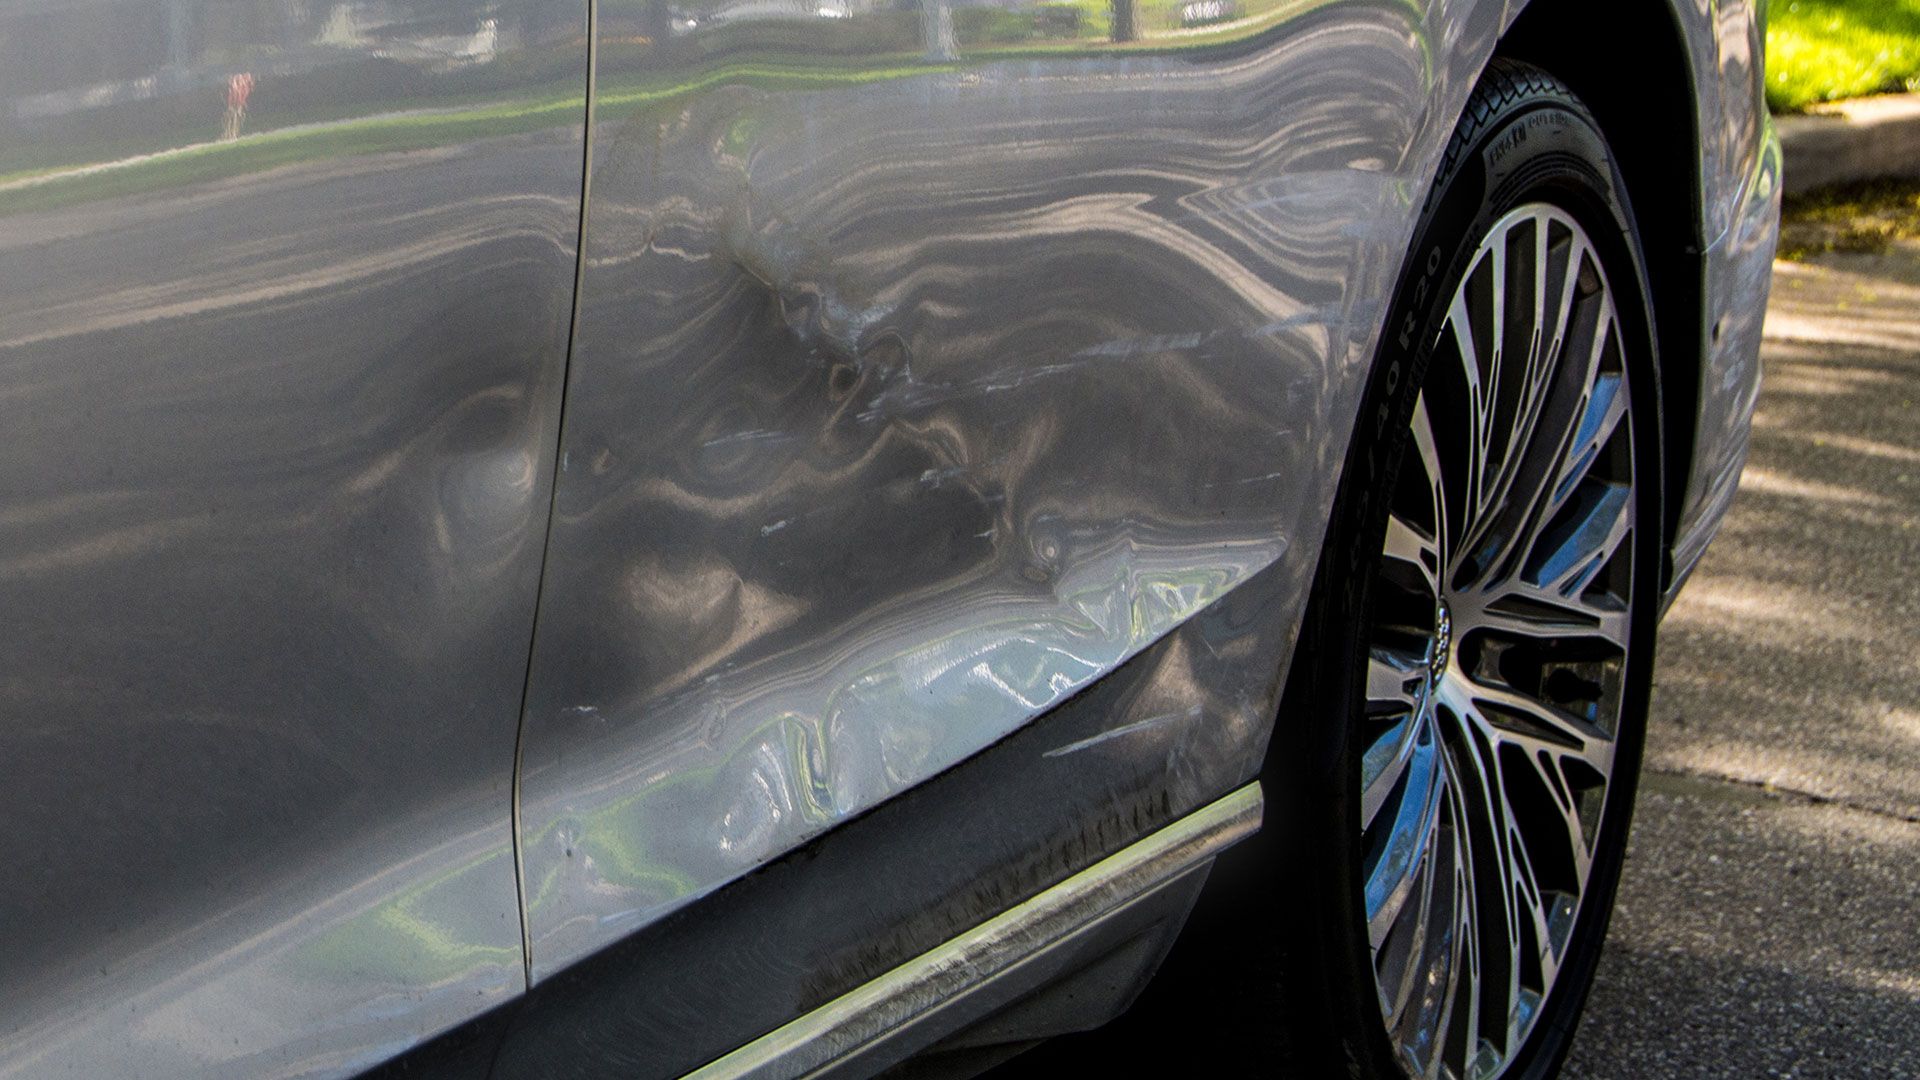 Image of a dent in the side of an Audi A8